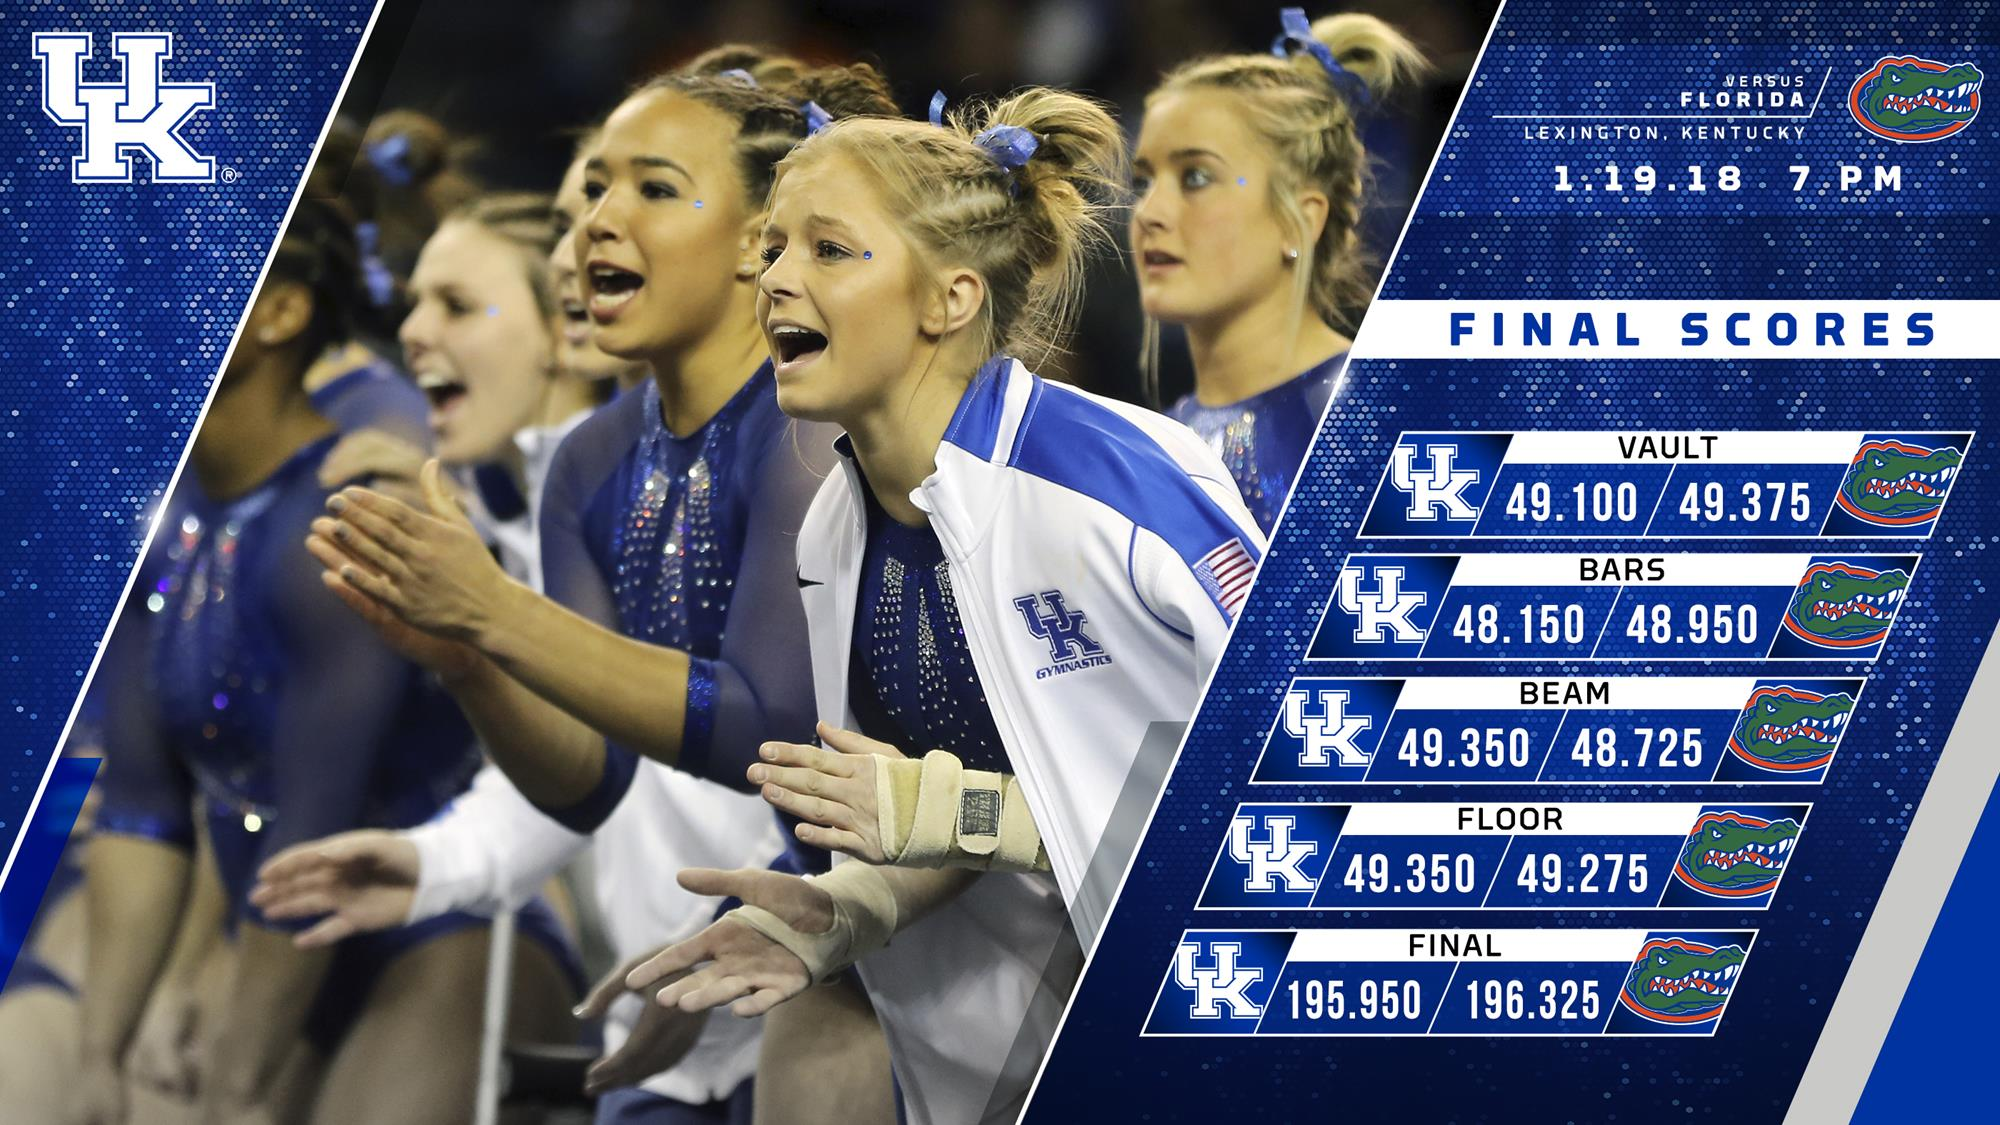 Mollie Korth Wins All-Around Title as Kentucky Falls to Florida, 196.325-195.950